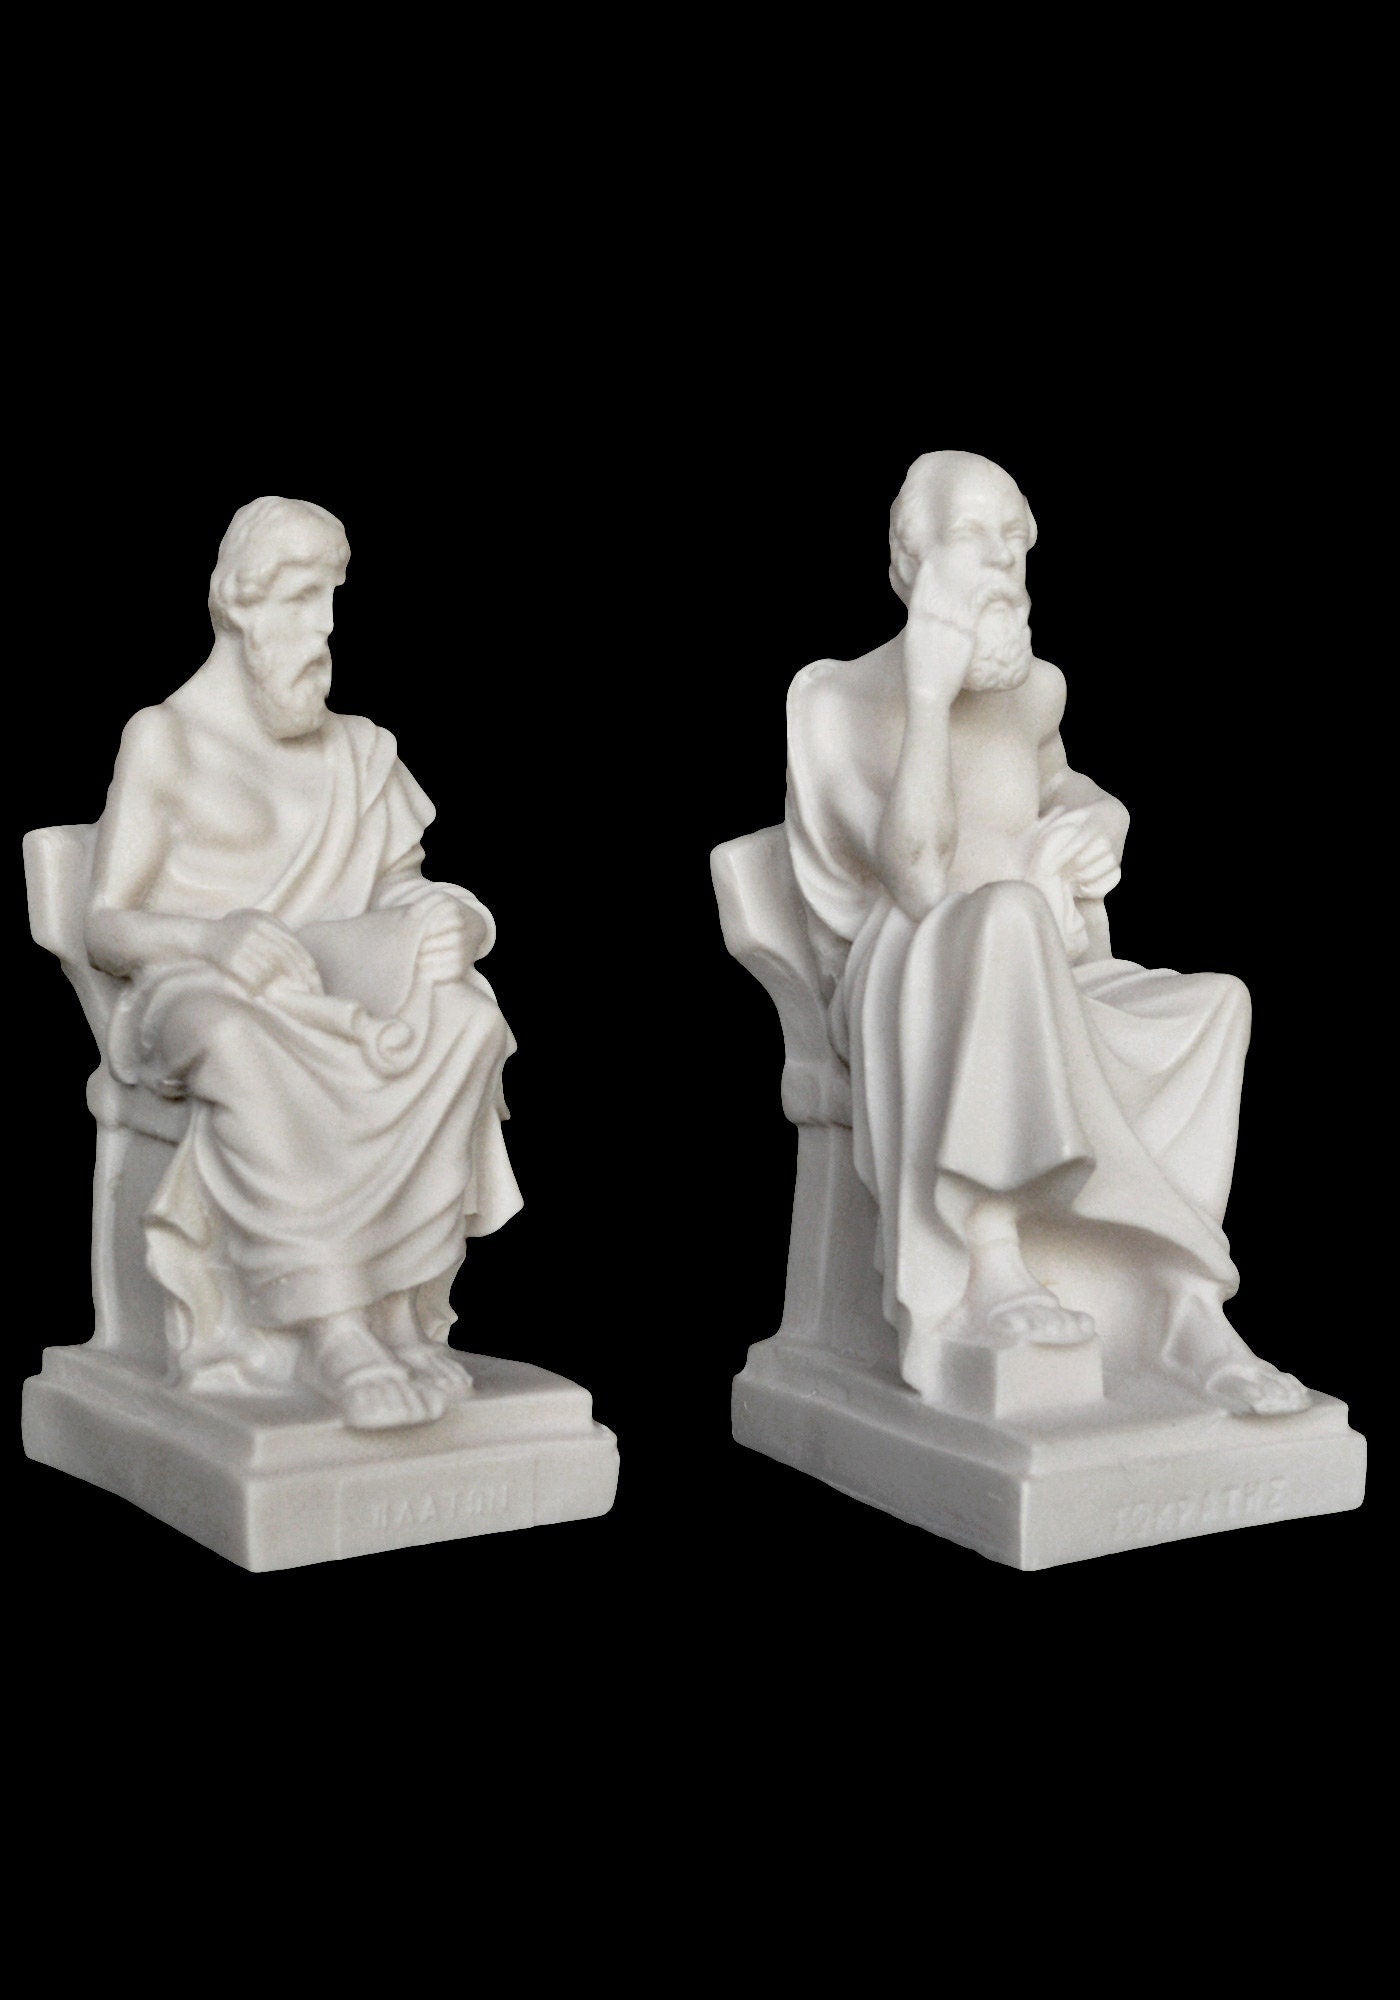 Socrates and Plato Set - Teacher and Student - Fathers of Western Philosophy - Alabaster Statues